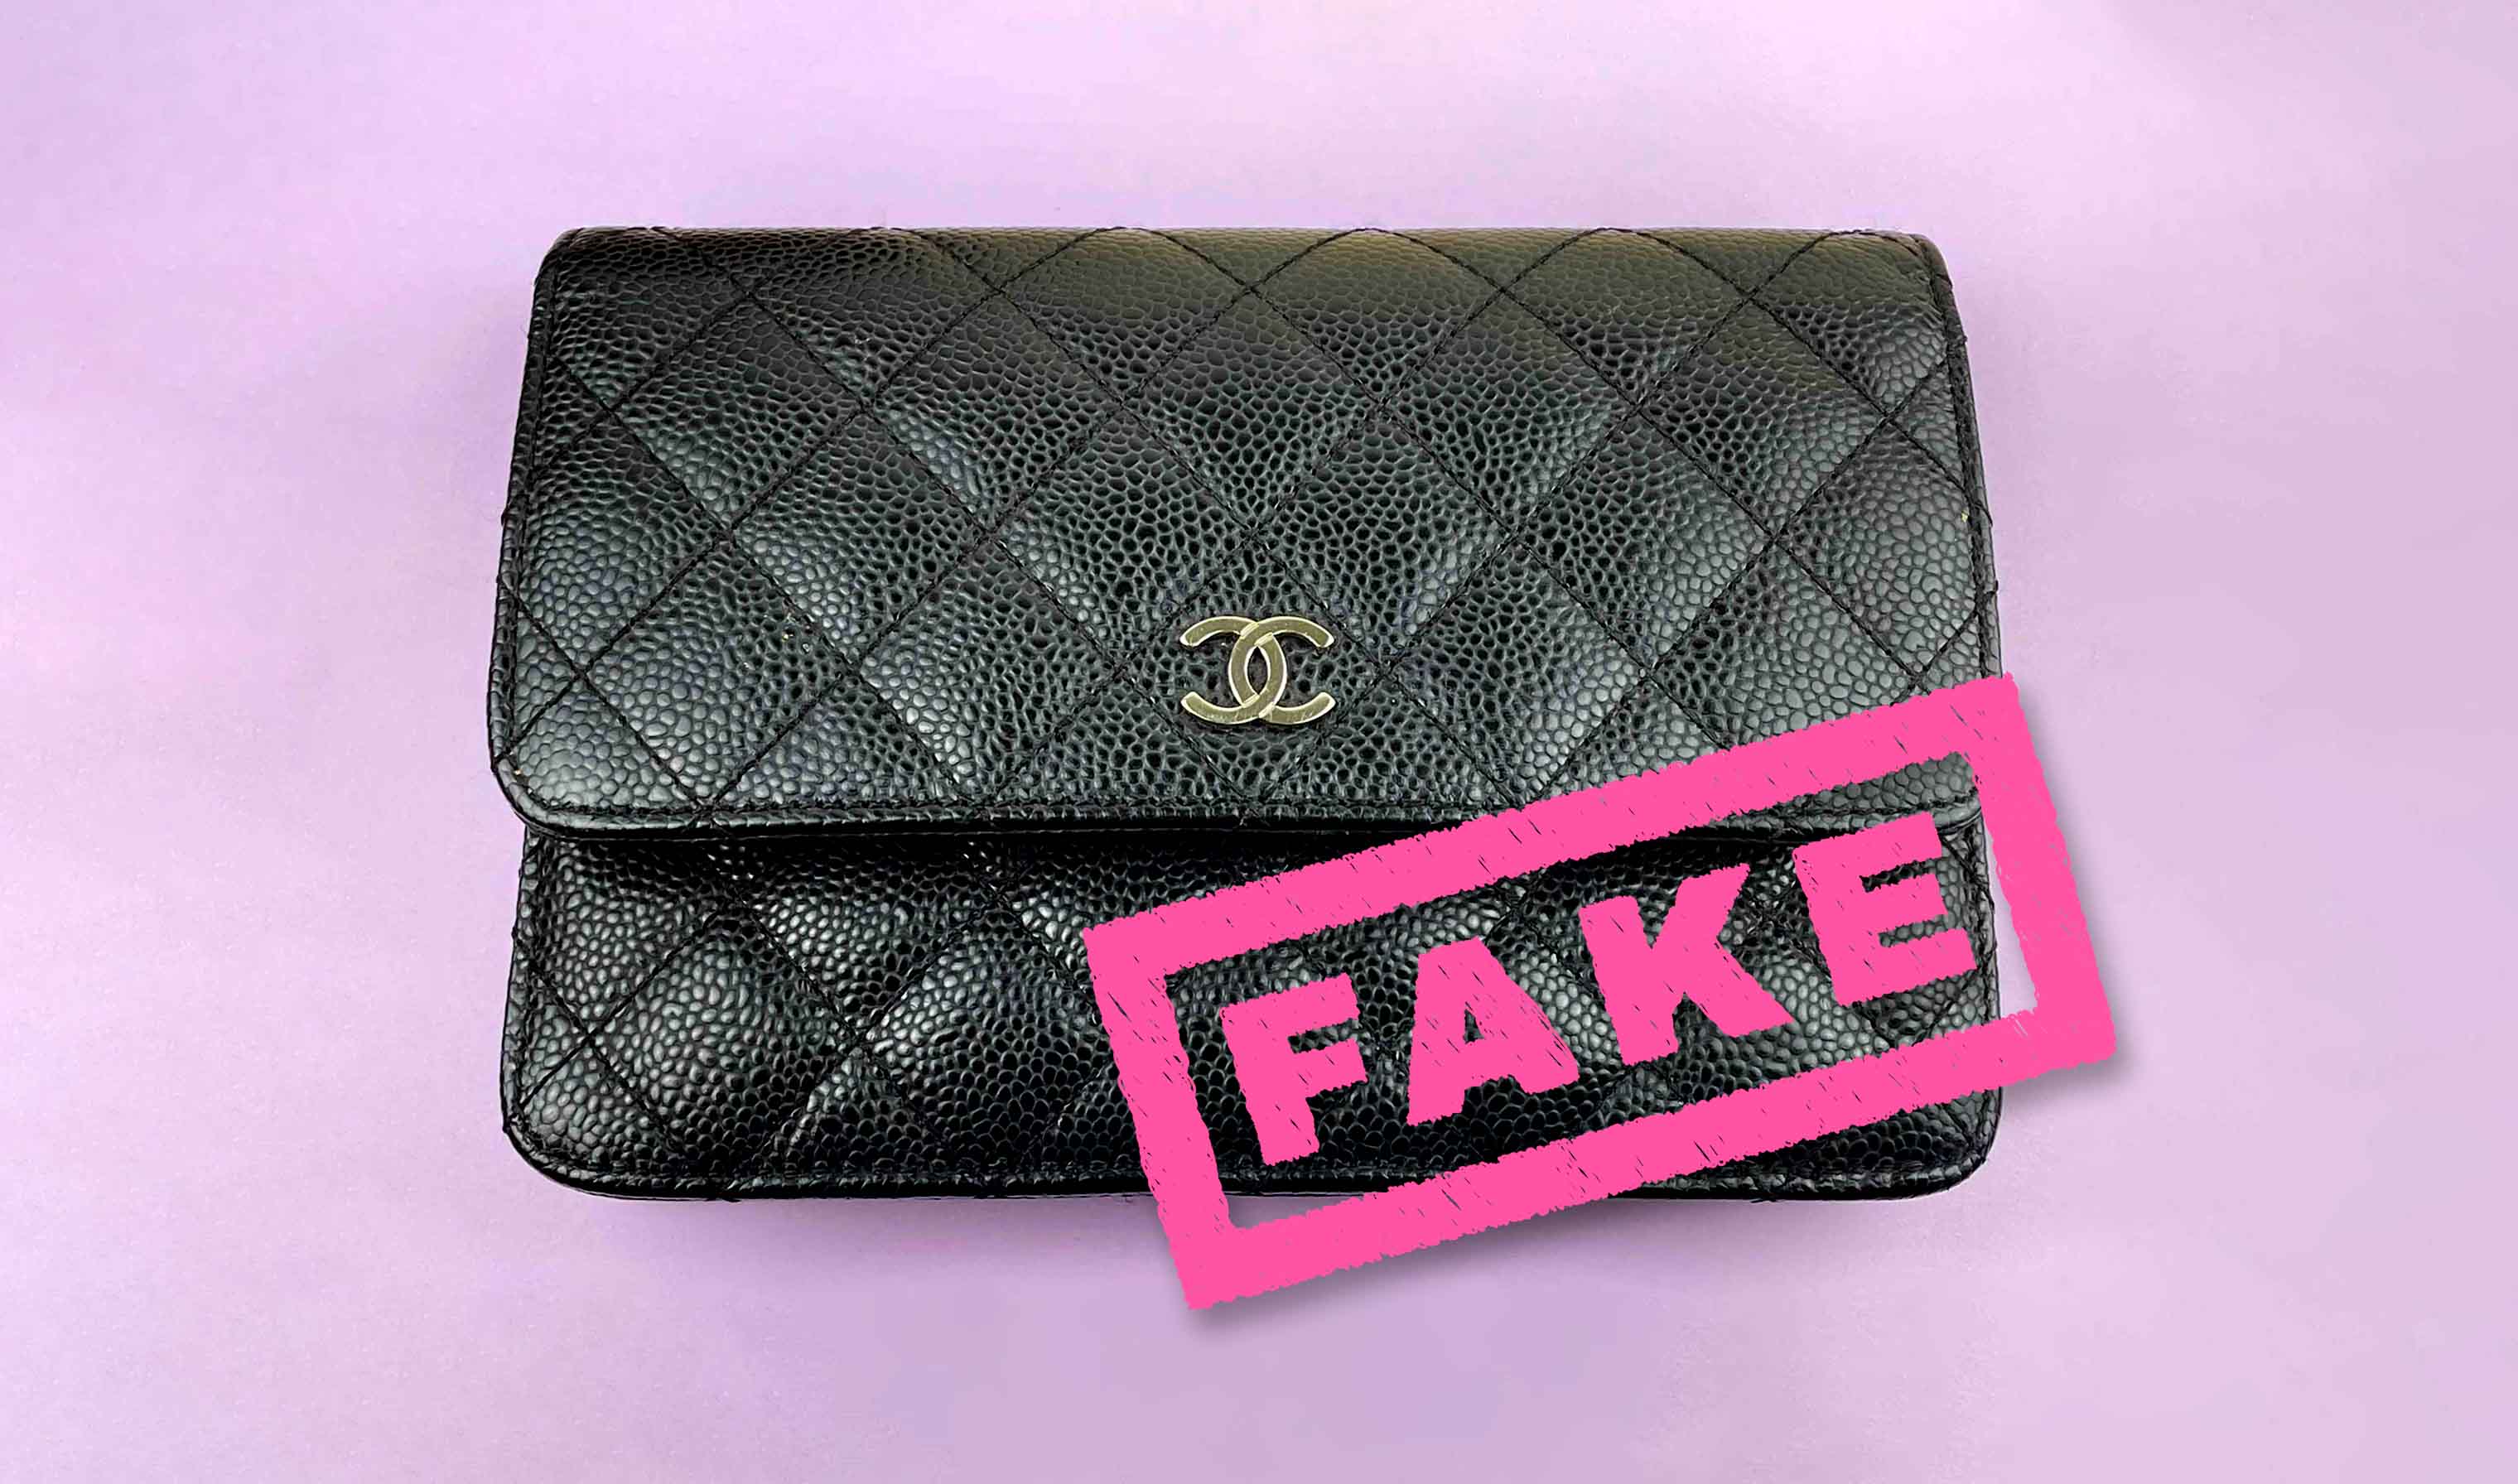 CHANEL, Bags, Authentic Verses Fake Chanel Before You Buy